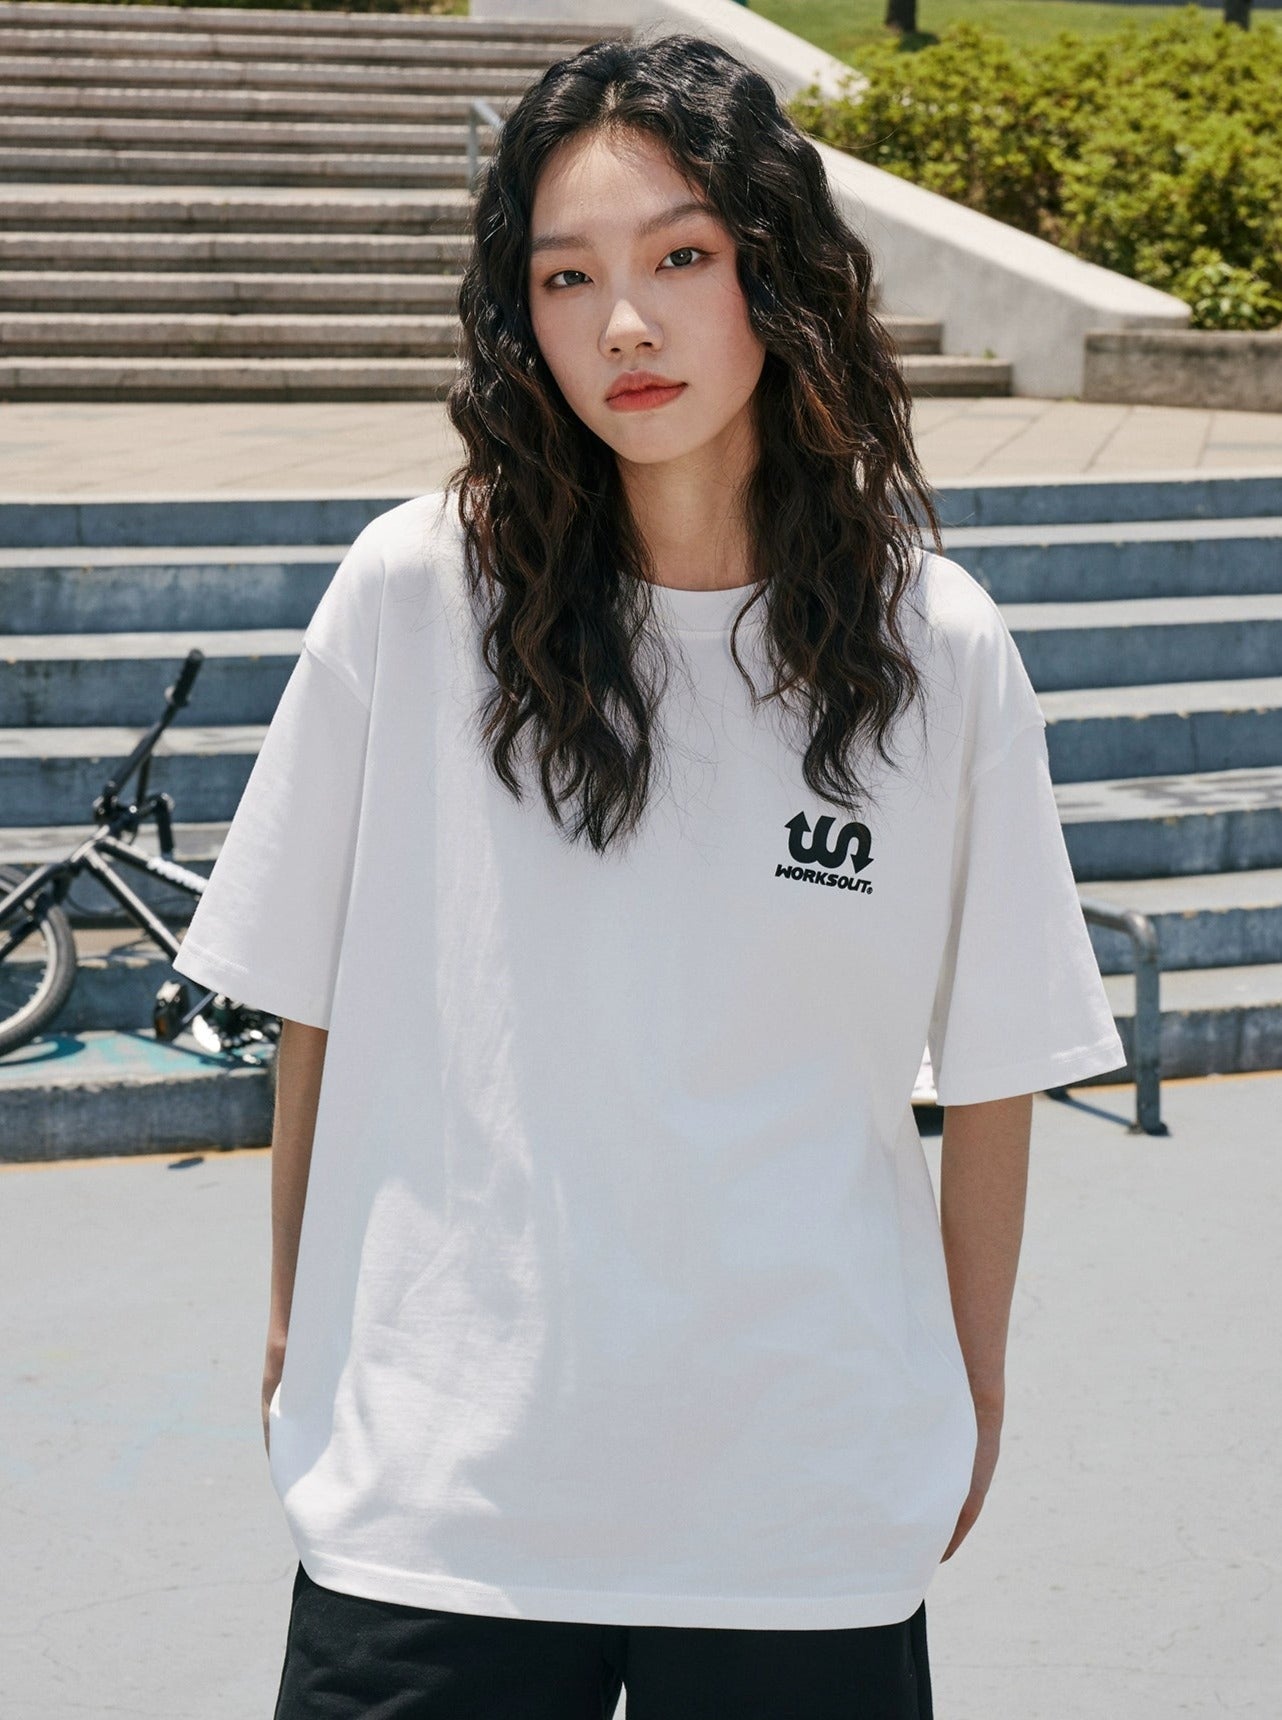 Casual Solic Color T-Shirt Korean Street Fashion T-Shirt By WORKSOUT Shop Online at OH Vault